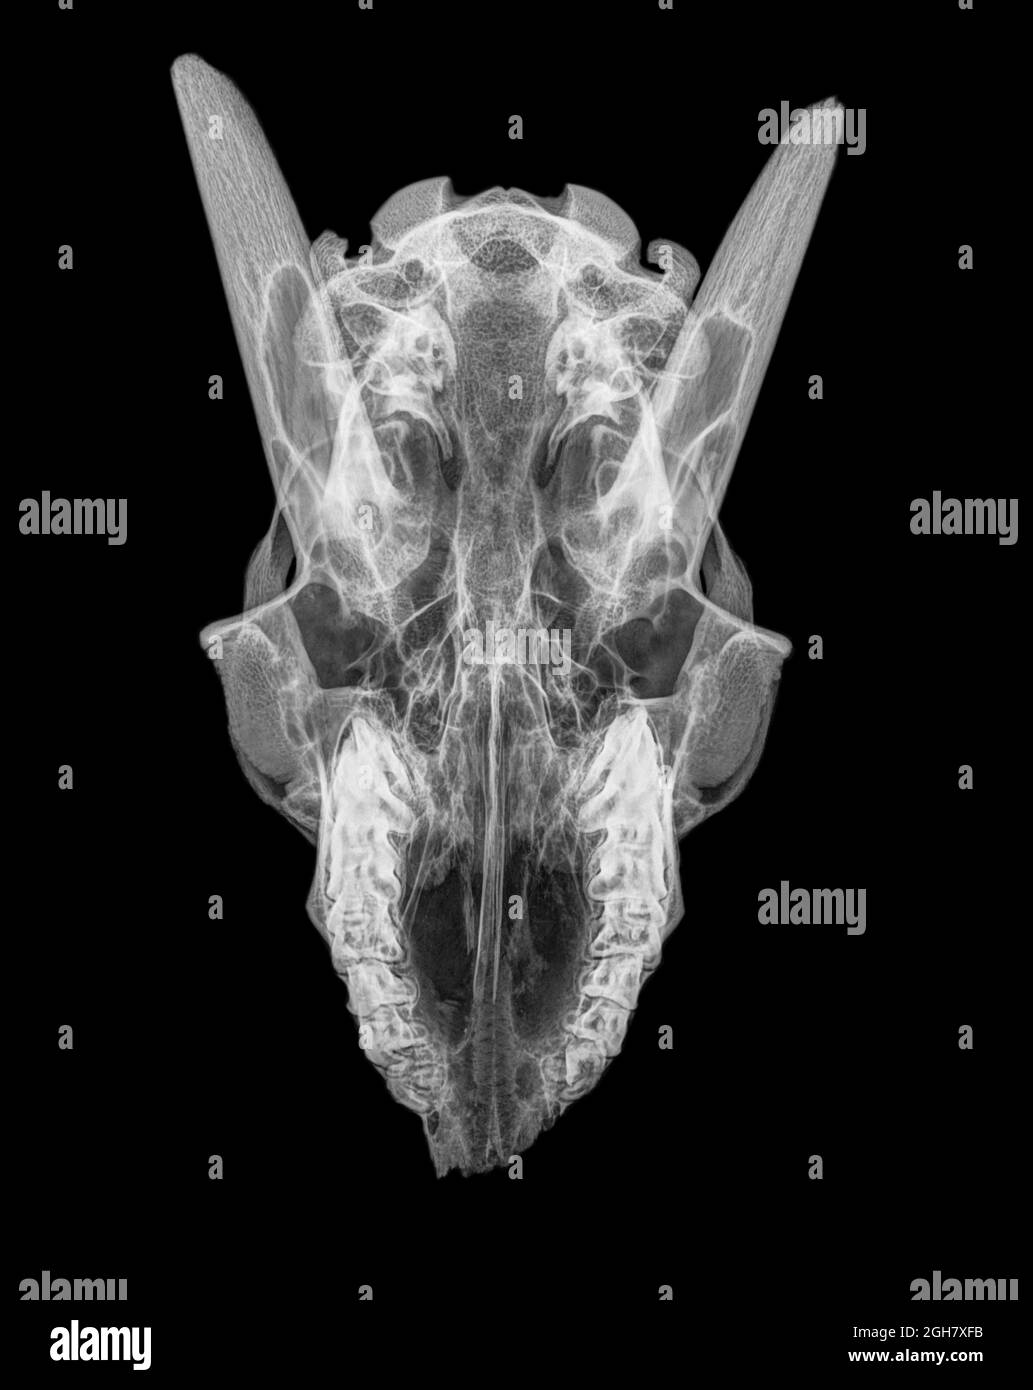 Top View X-ray of a skull of a goat on black background Stock Photo